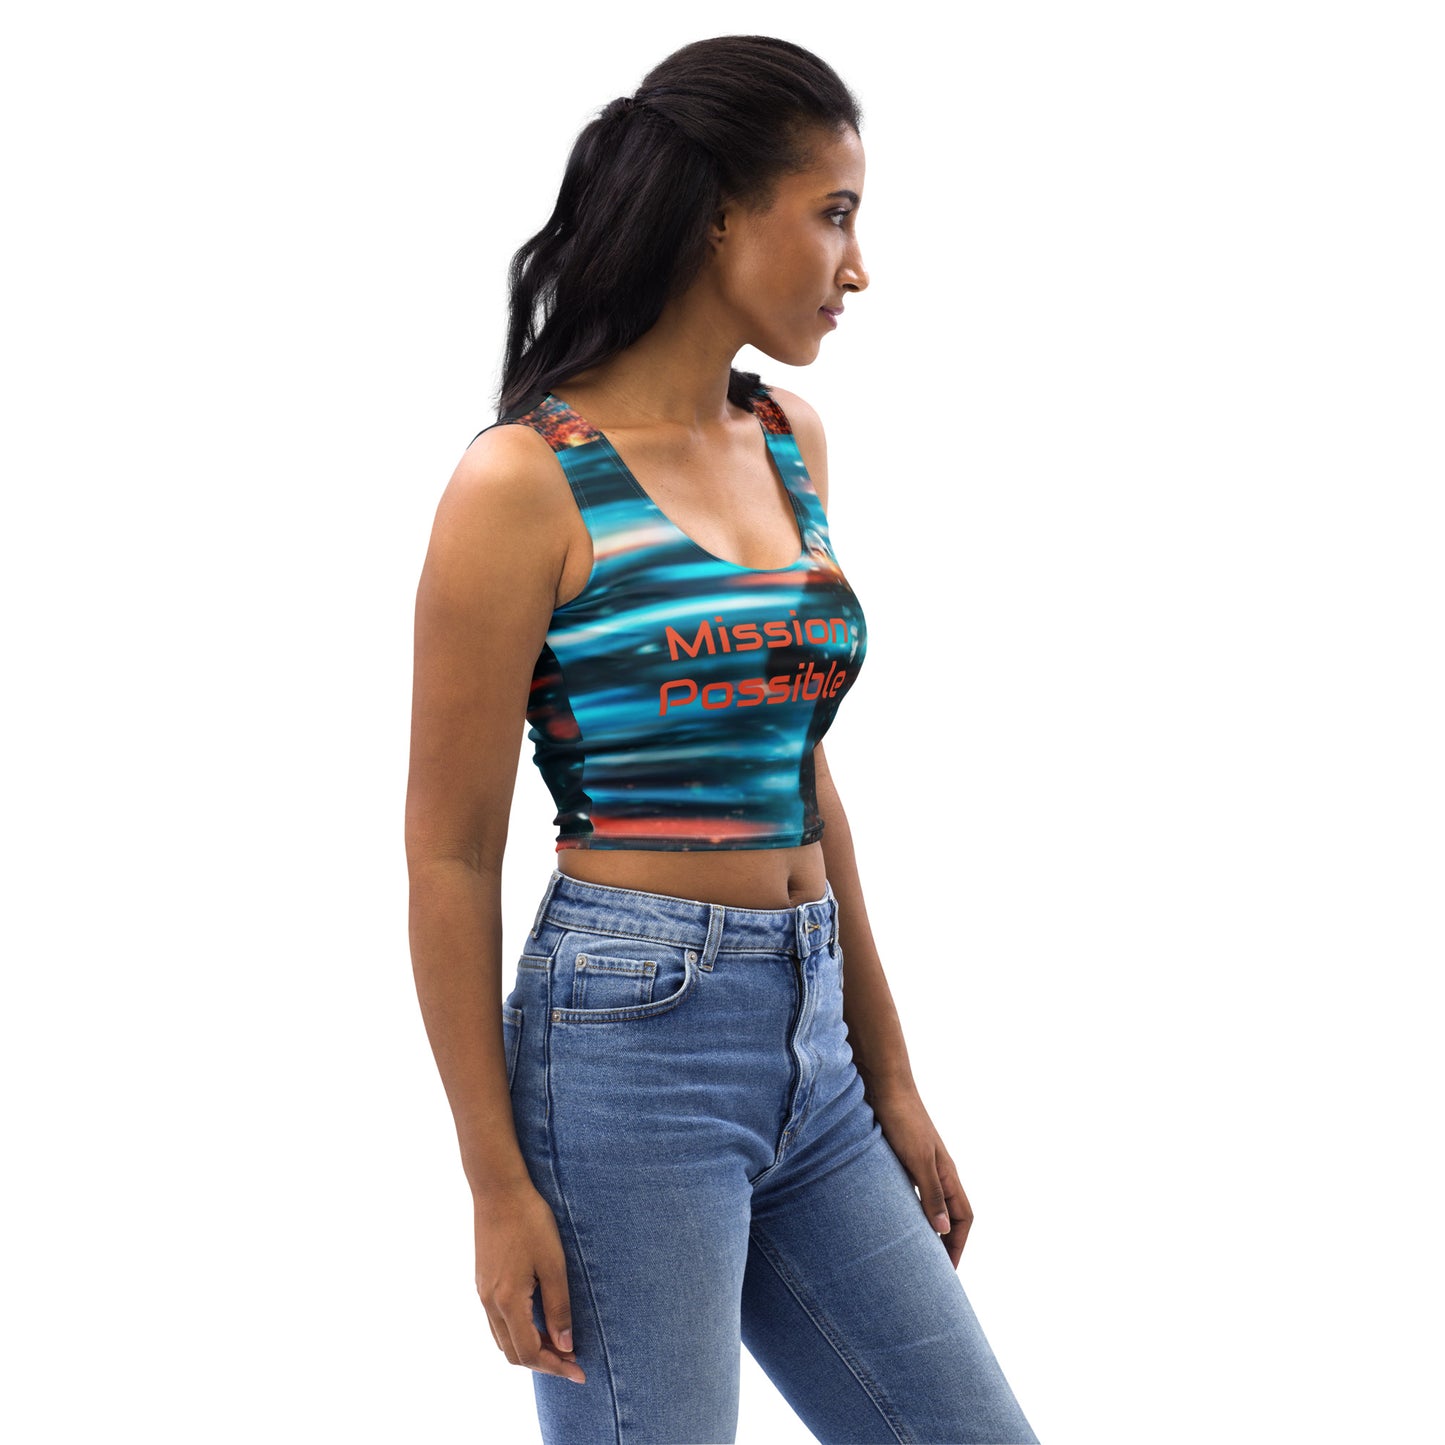 Mission Possible-Crop Top